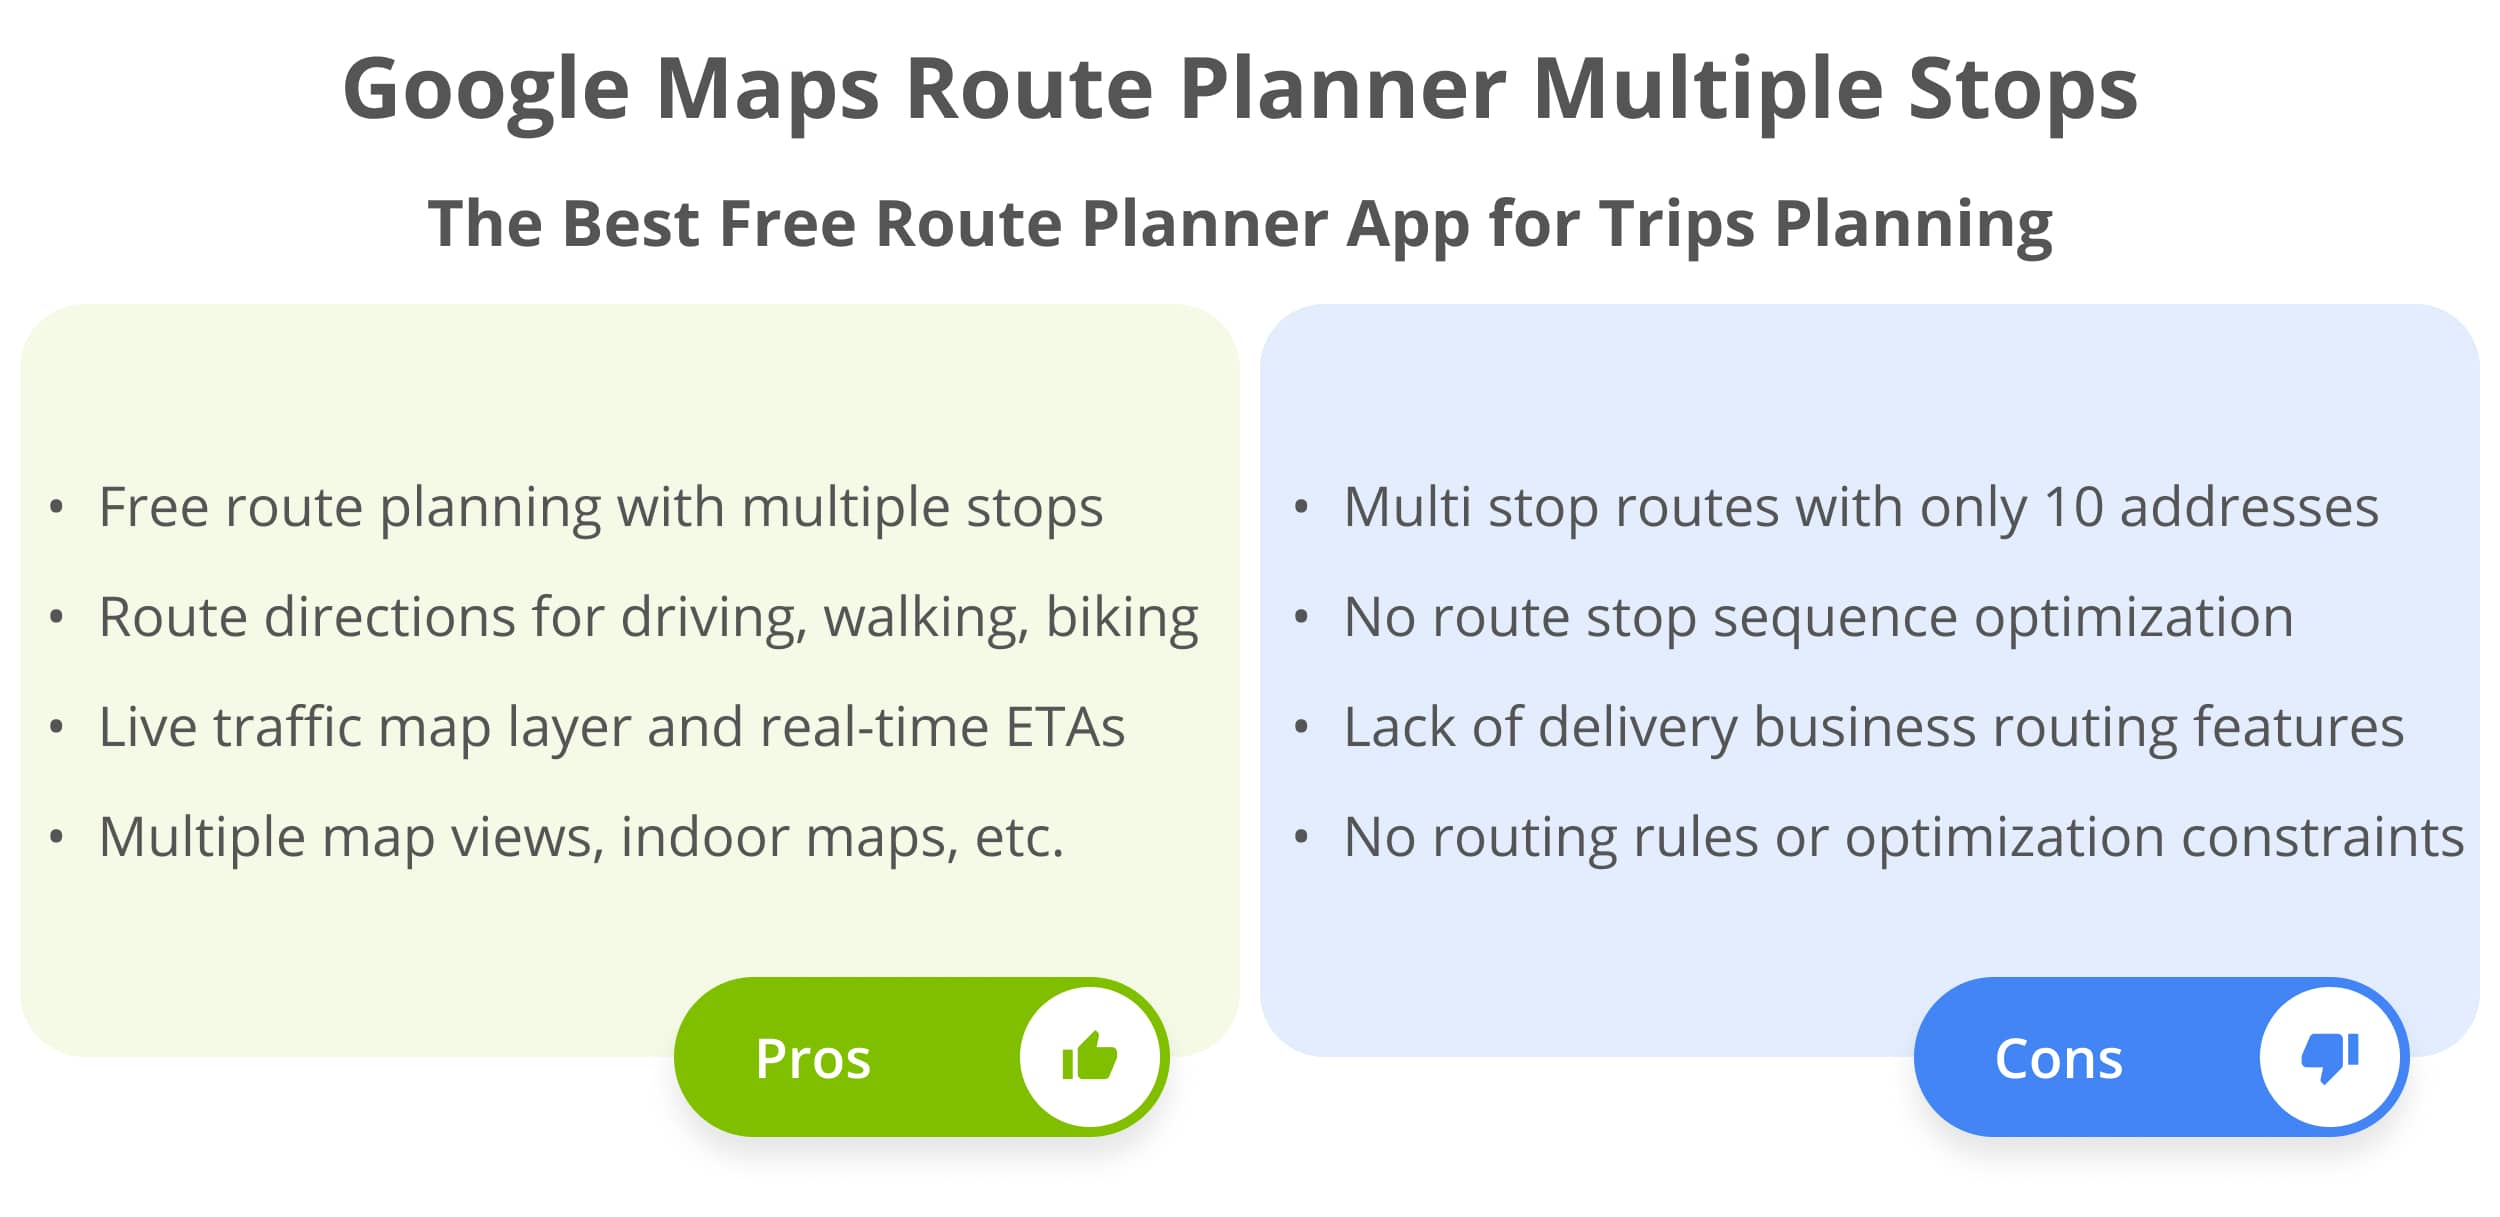 The pros and cons of using Google Maps route planner multiple stops for multi point route planning.